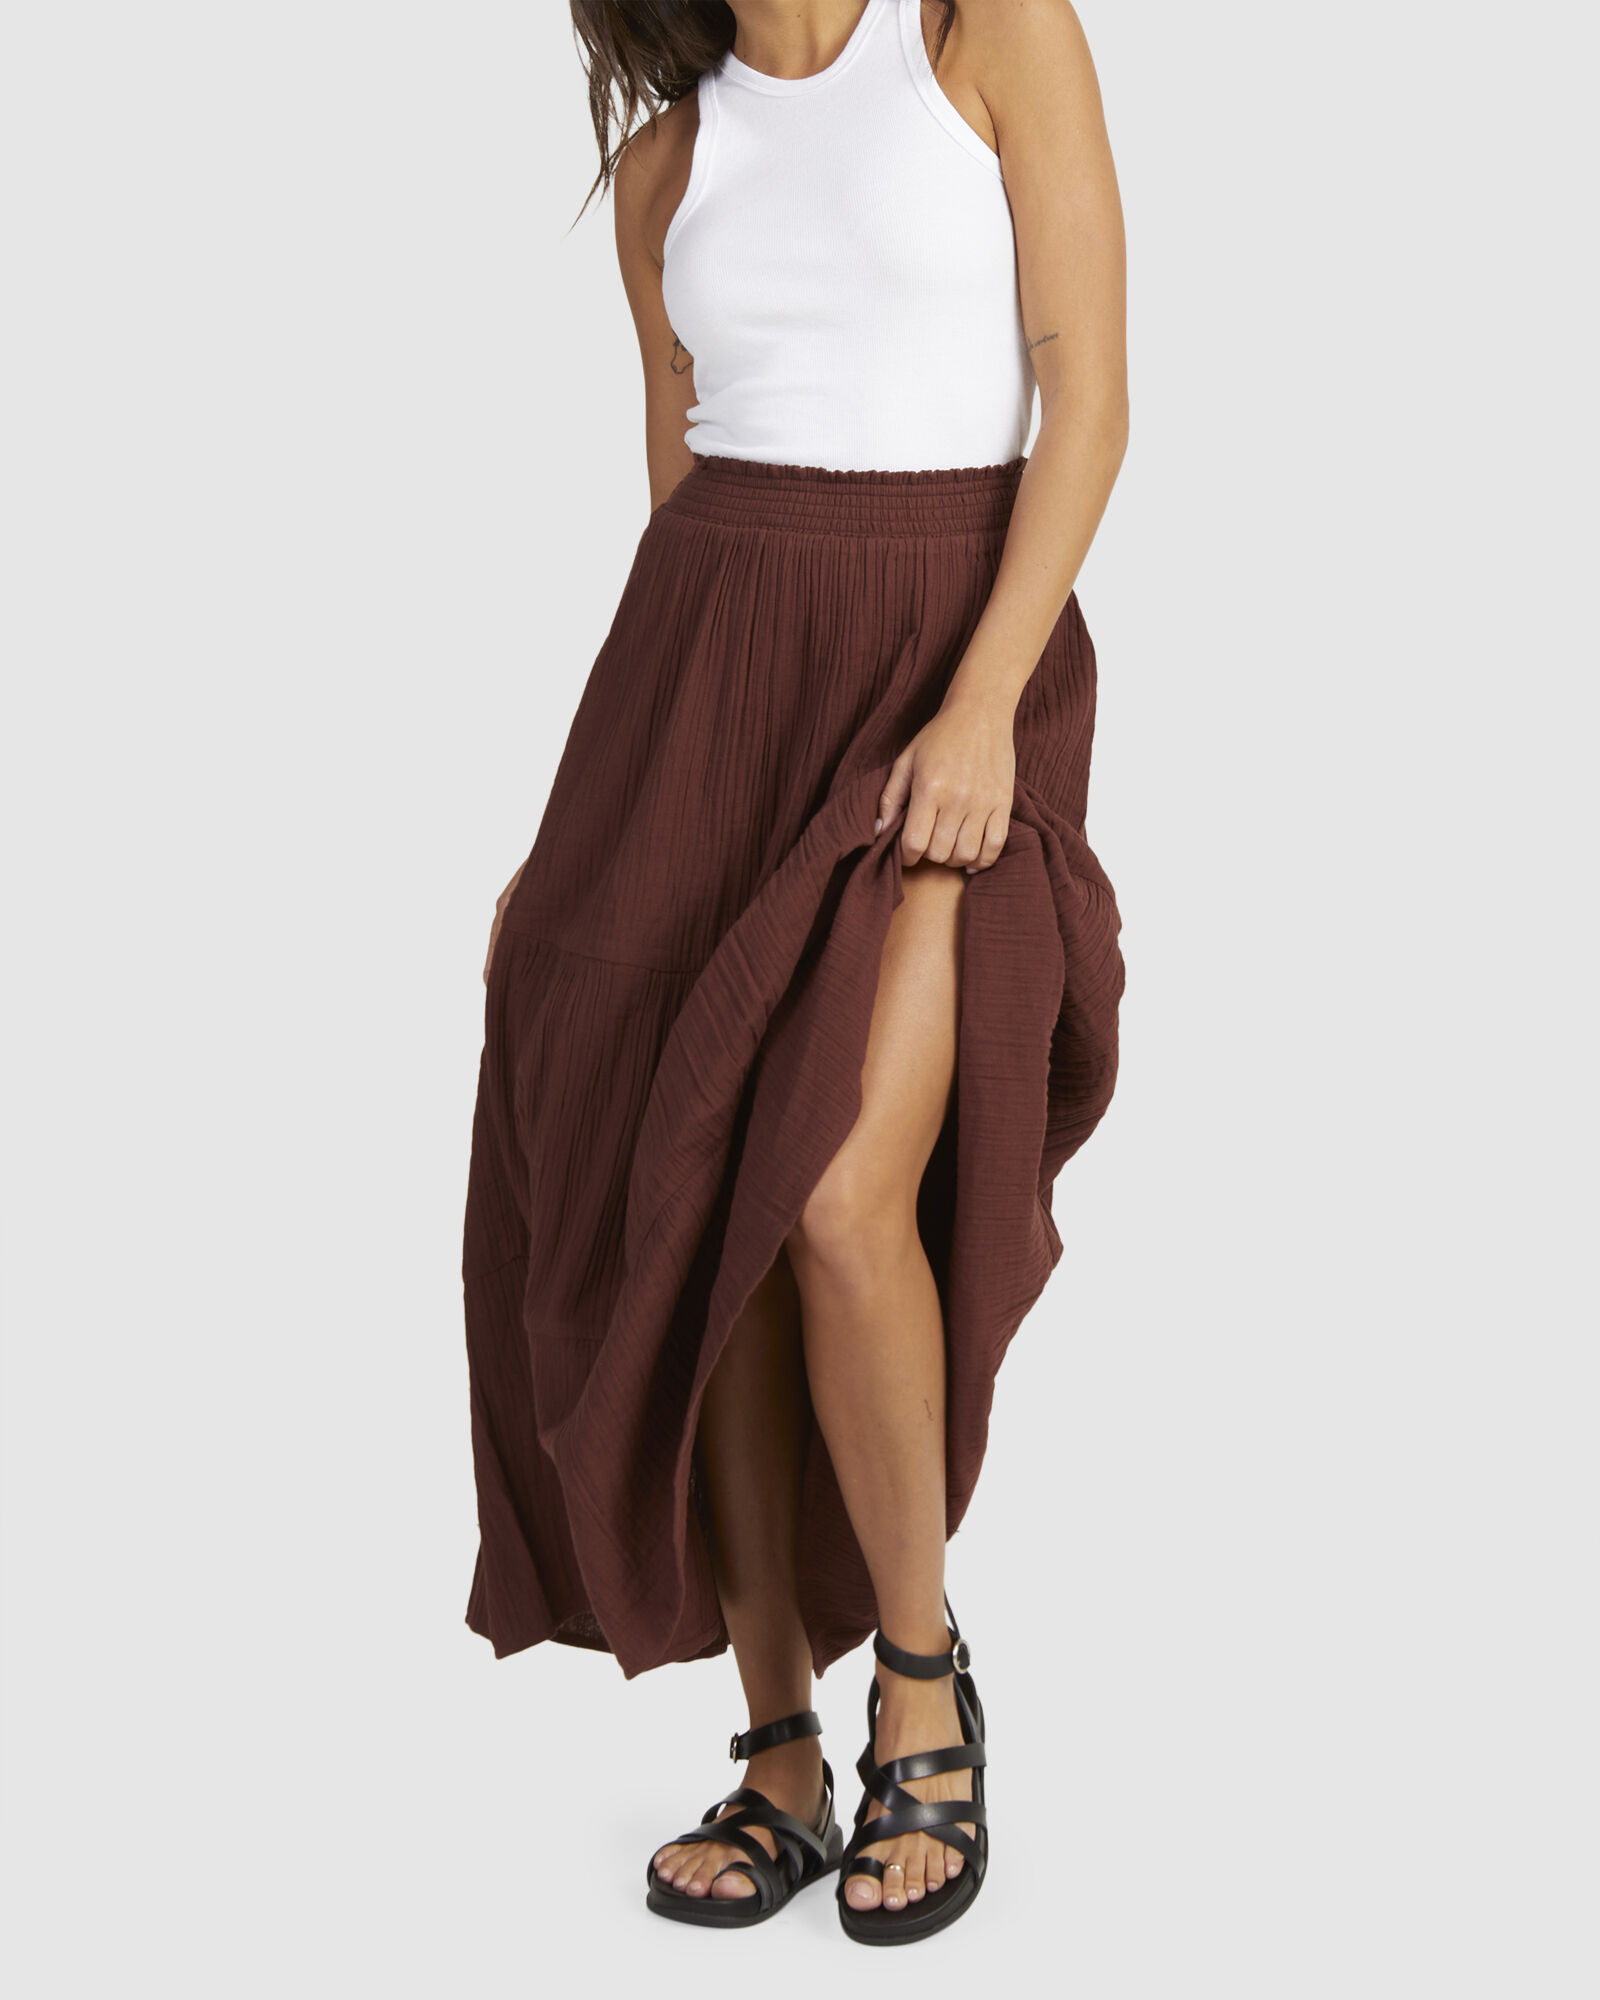 ROXY In A Dream Skirt | CoolSprings Galleria